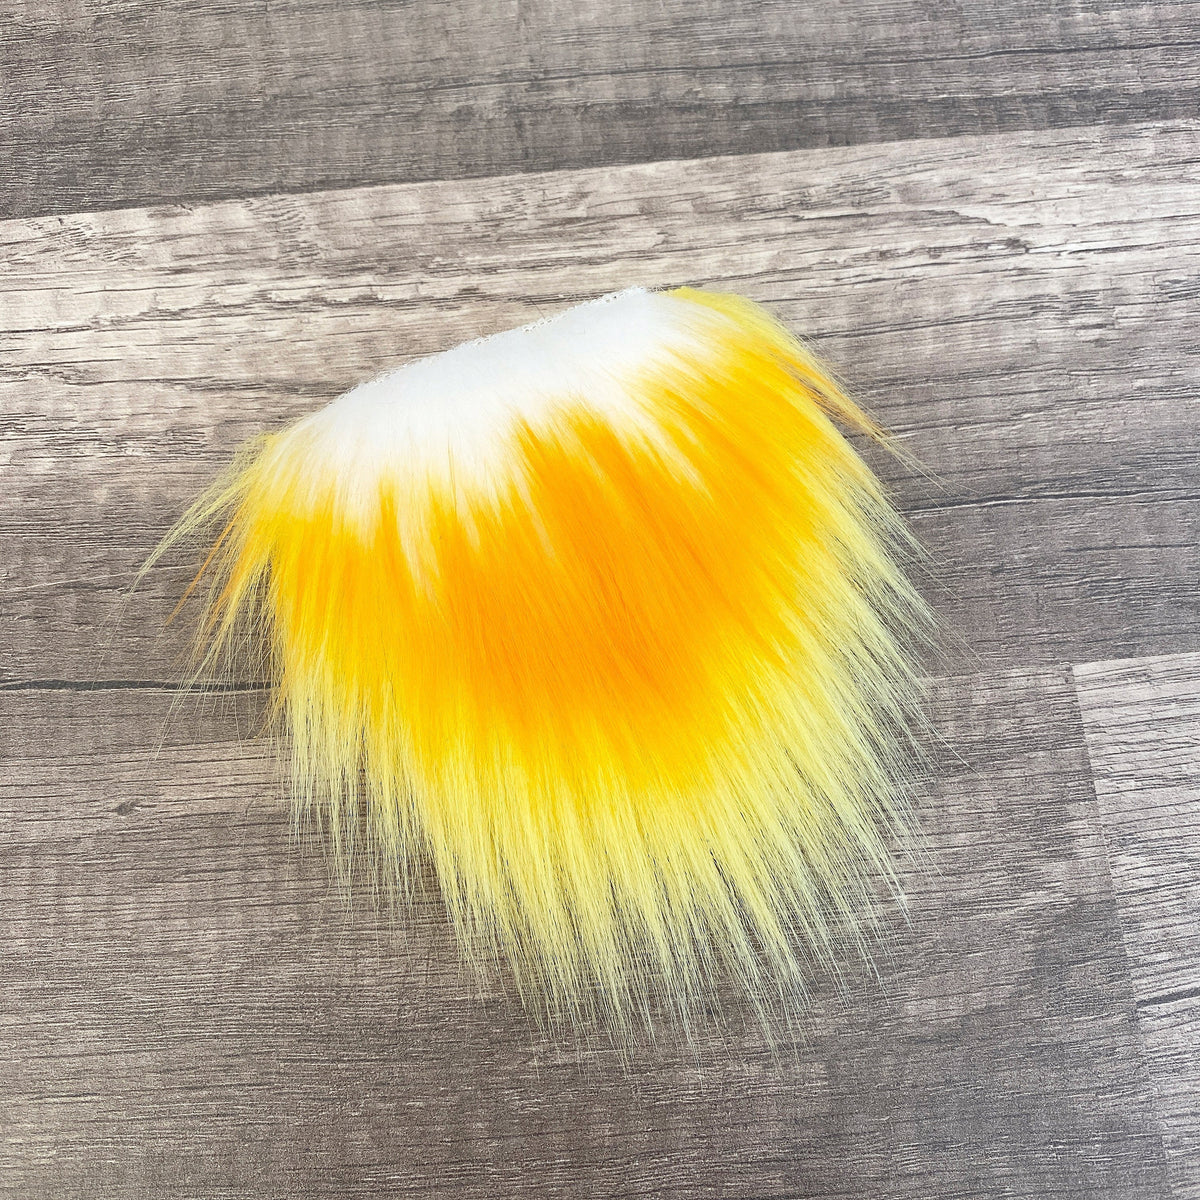 Two Piece Layered Gnome Beard - Orange-Tipped White Over Straight Yellow